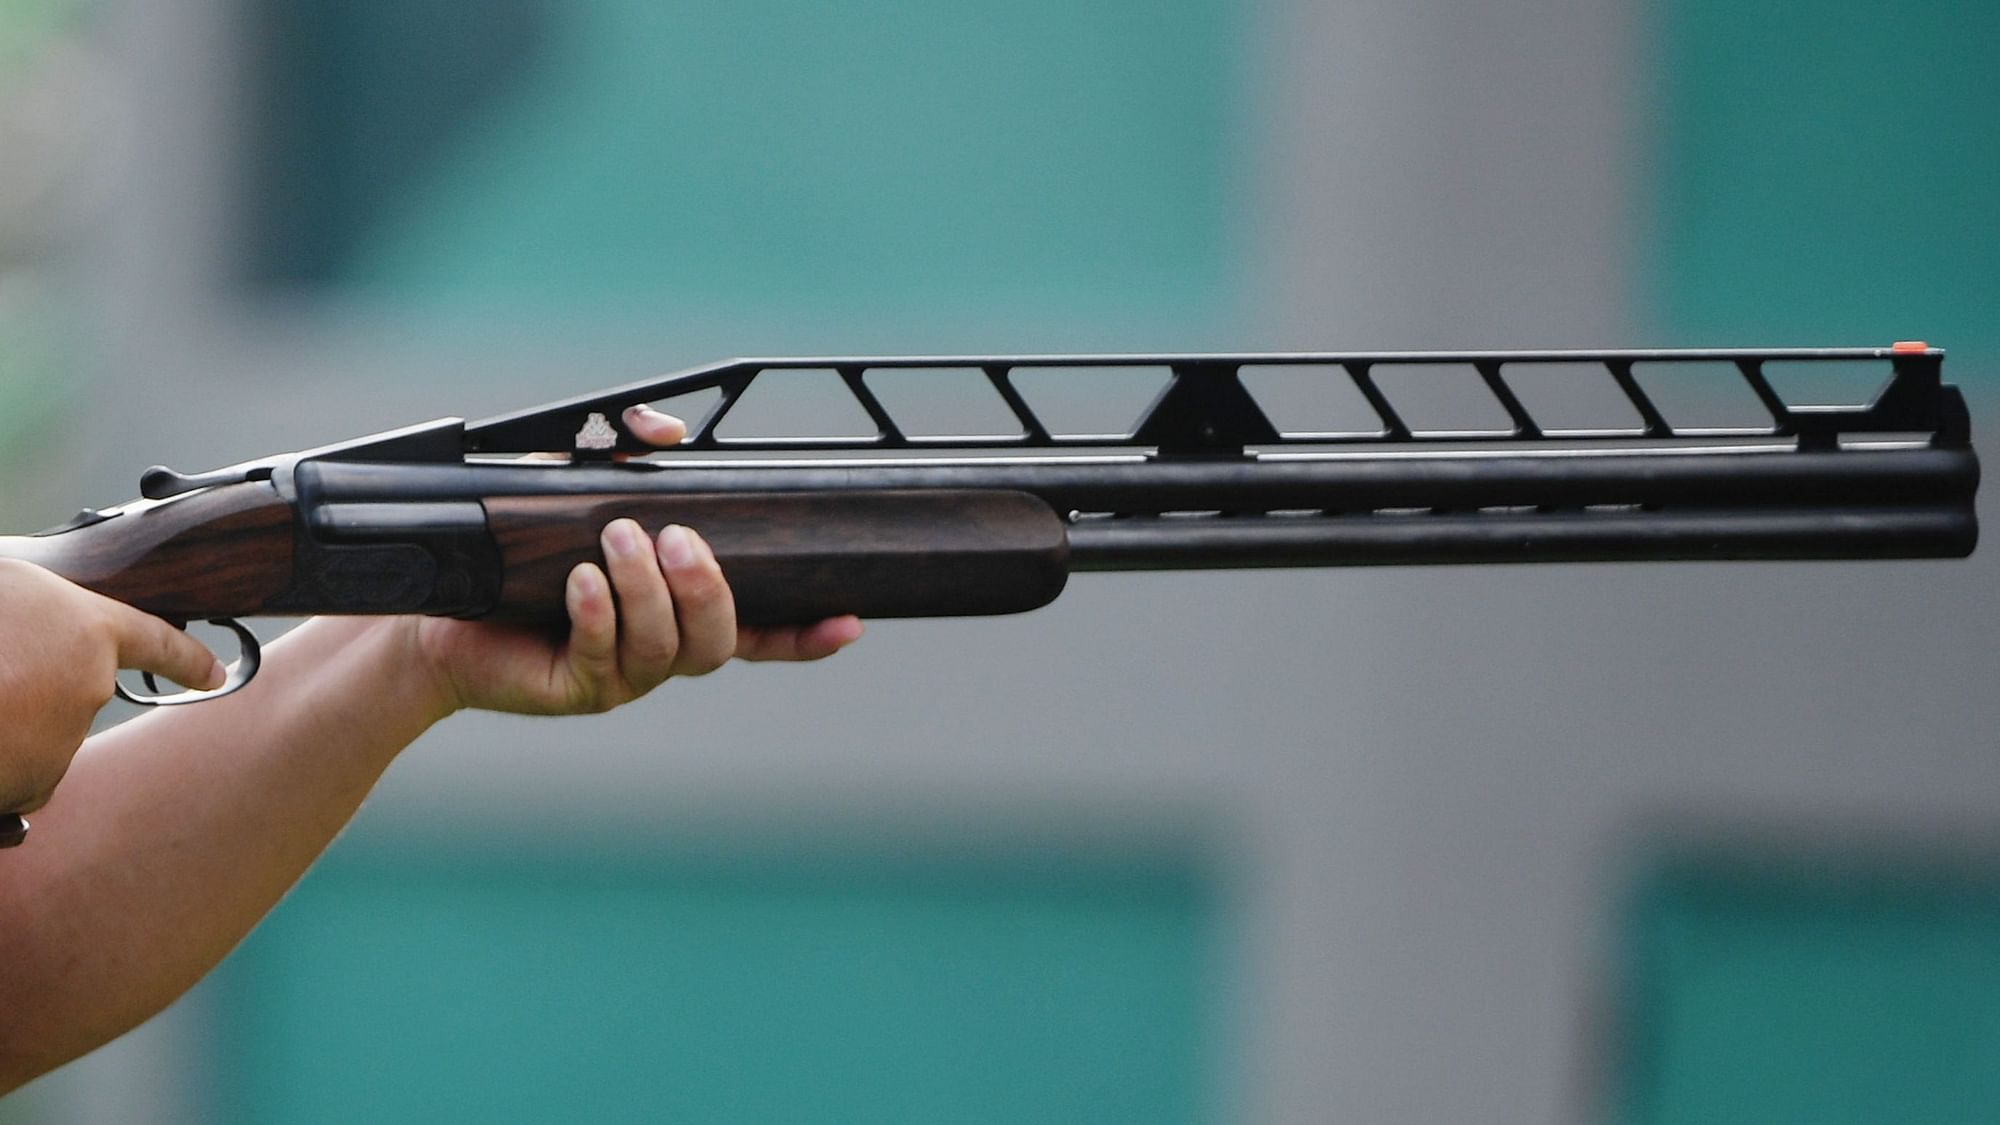 Pakistan’s shooting federation wrote to ISSF, asking it to drop the two 25m rapid fire pistol quotas for 2020 Olympics, in the season-opening World Cup in New Delhi.